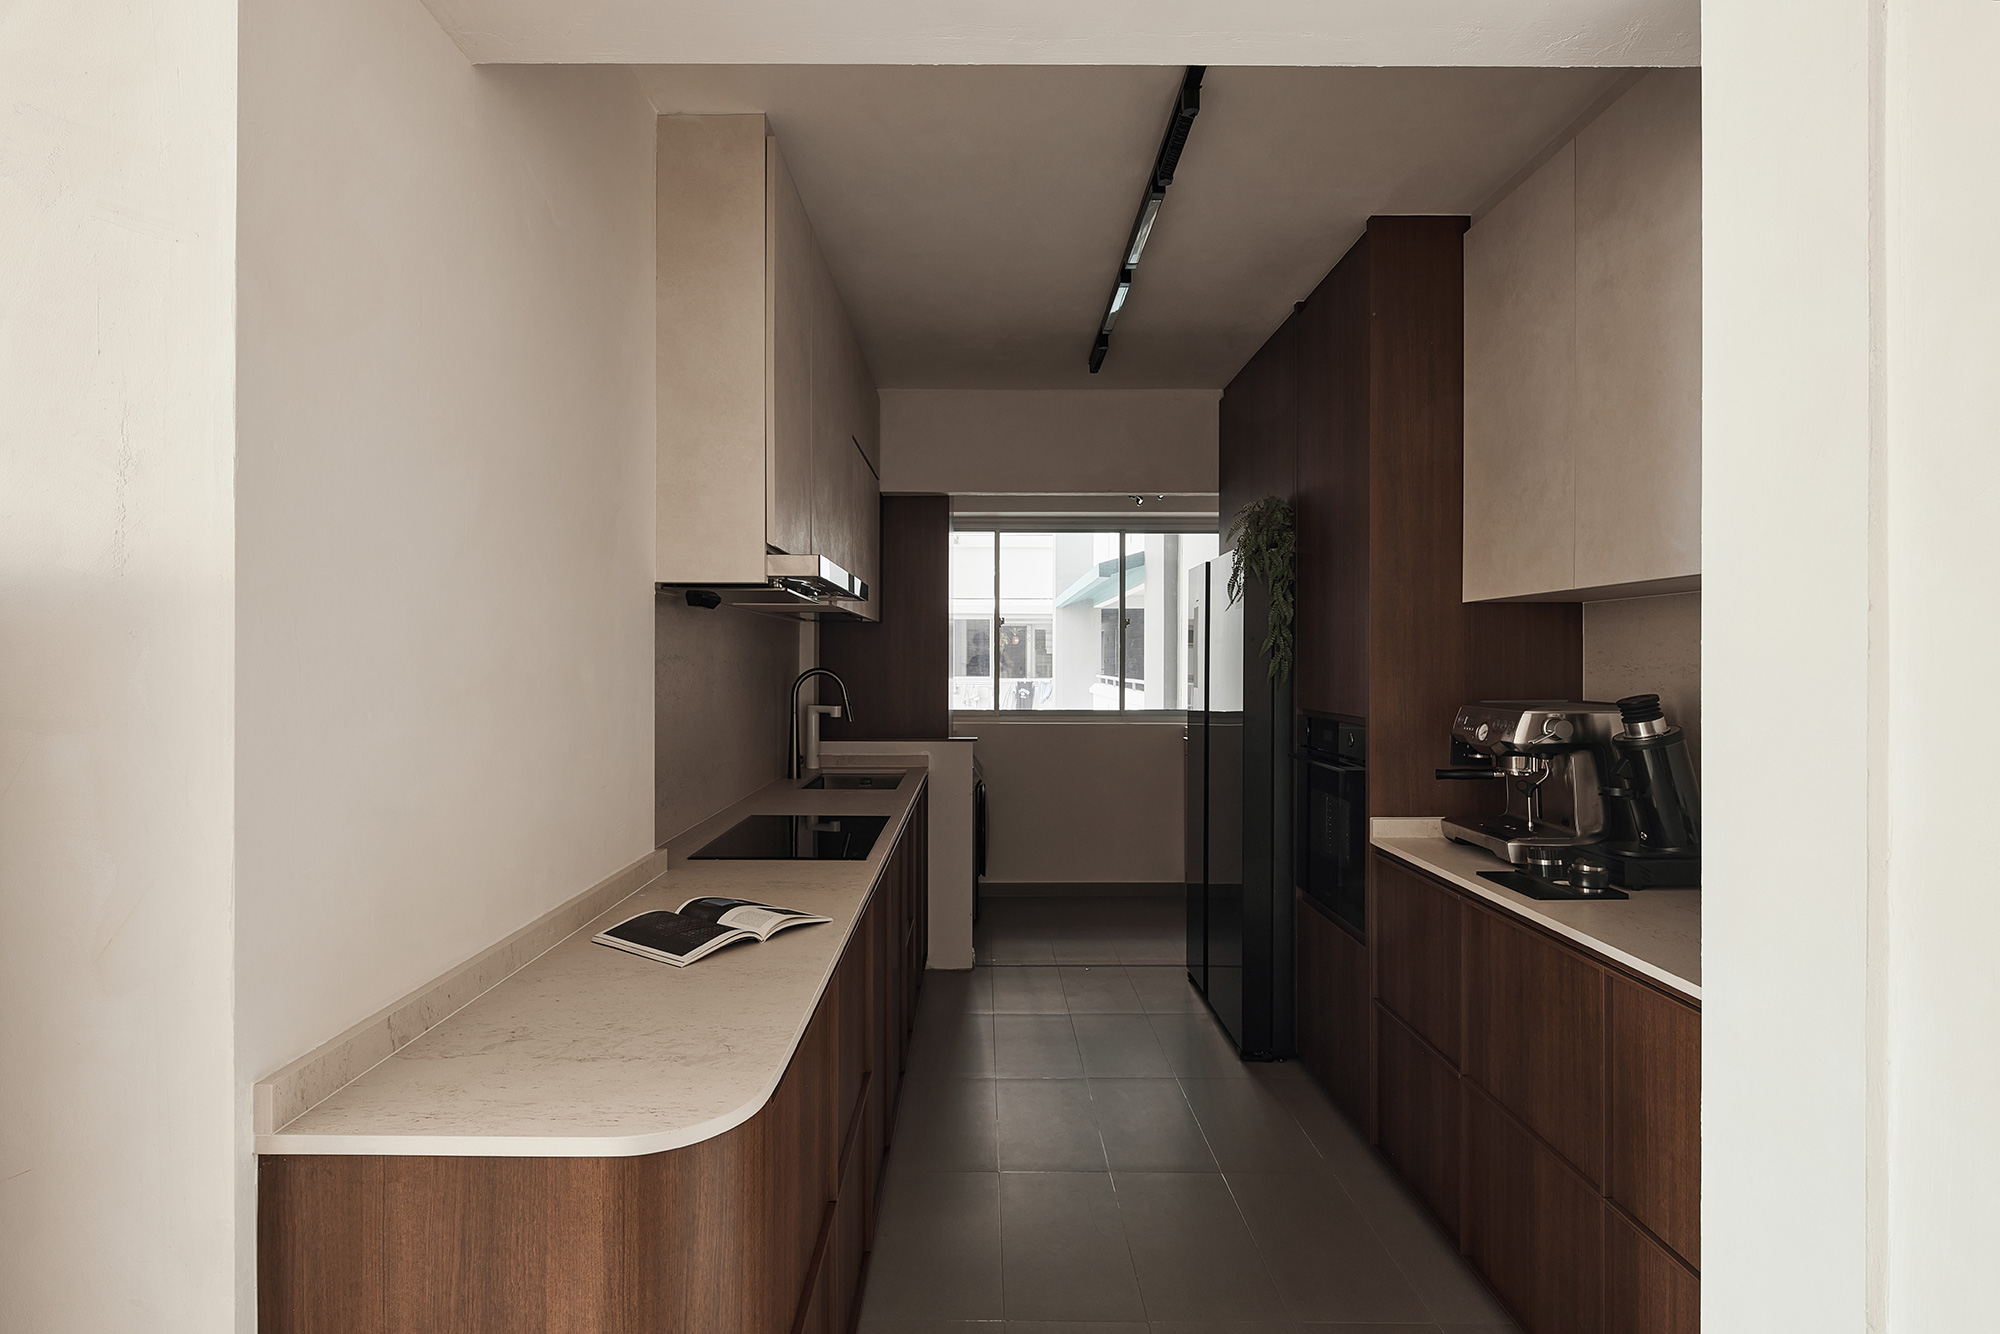 Image of 629A Tampines north dr 2 12 39 15 1 in The challenge of designing an unusual kitchen made possible with the help of Cosentino - Cosentino